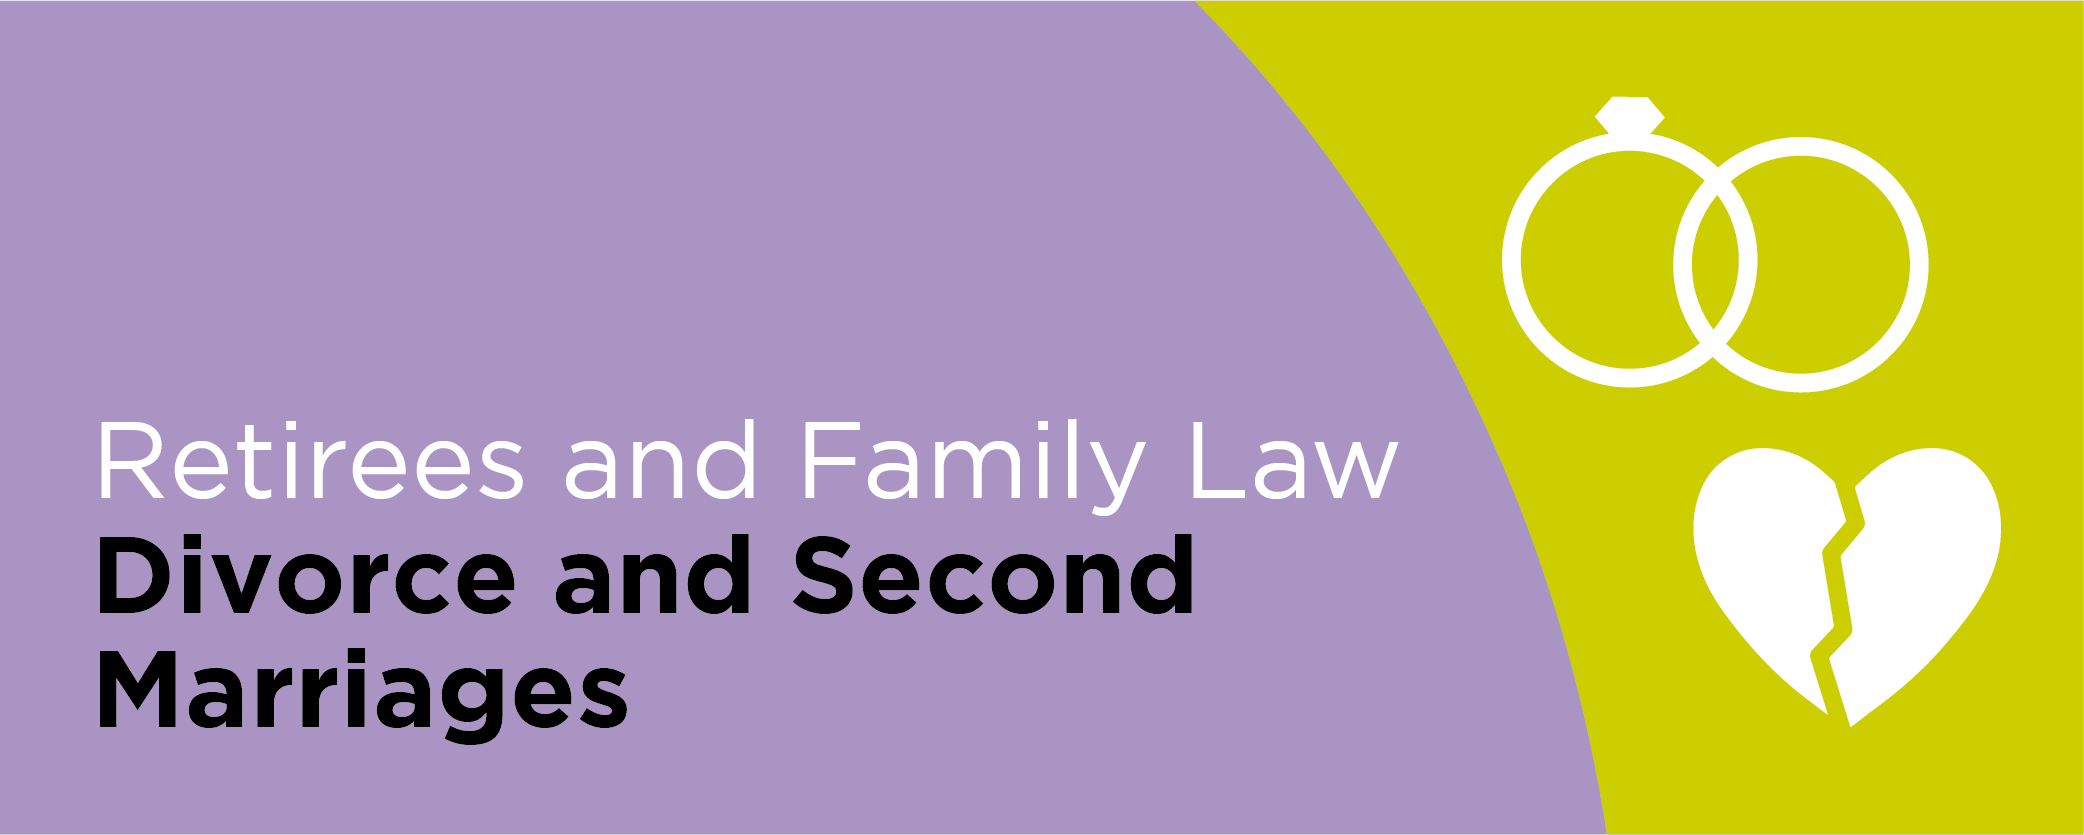 Retirees and Family Law: Divorce and Second Marriages